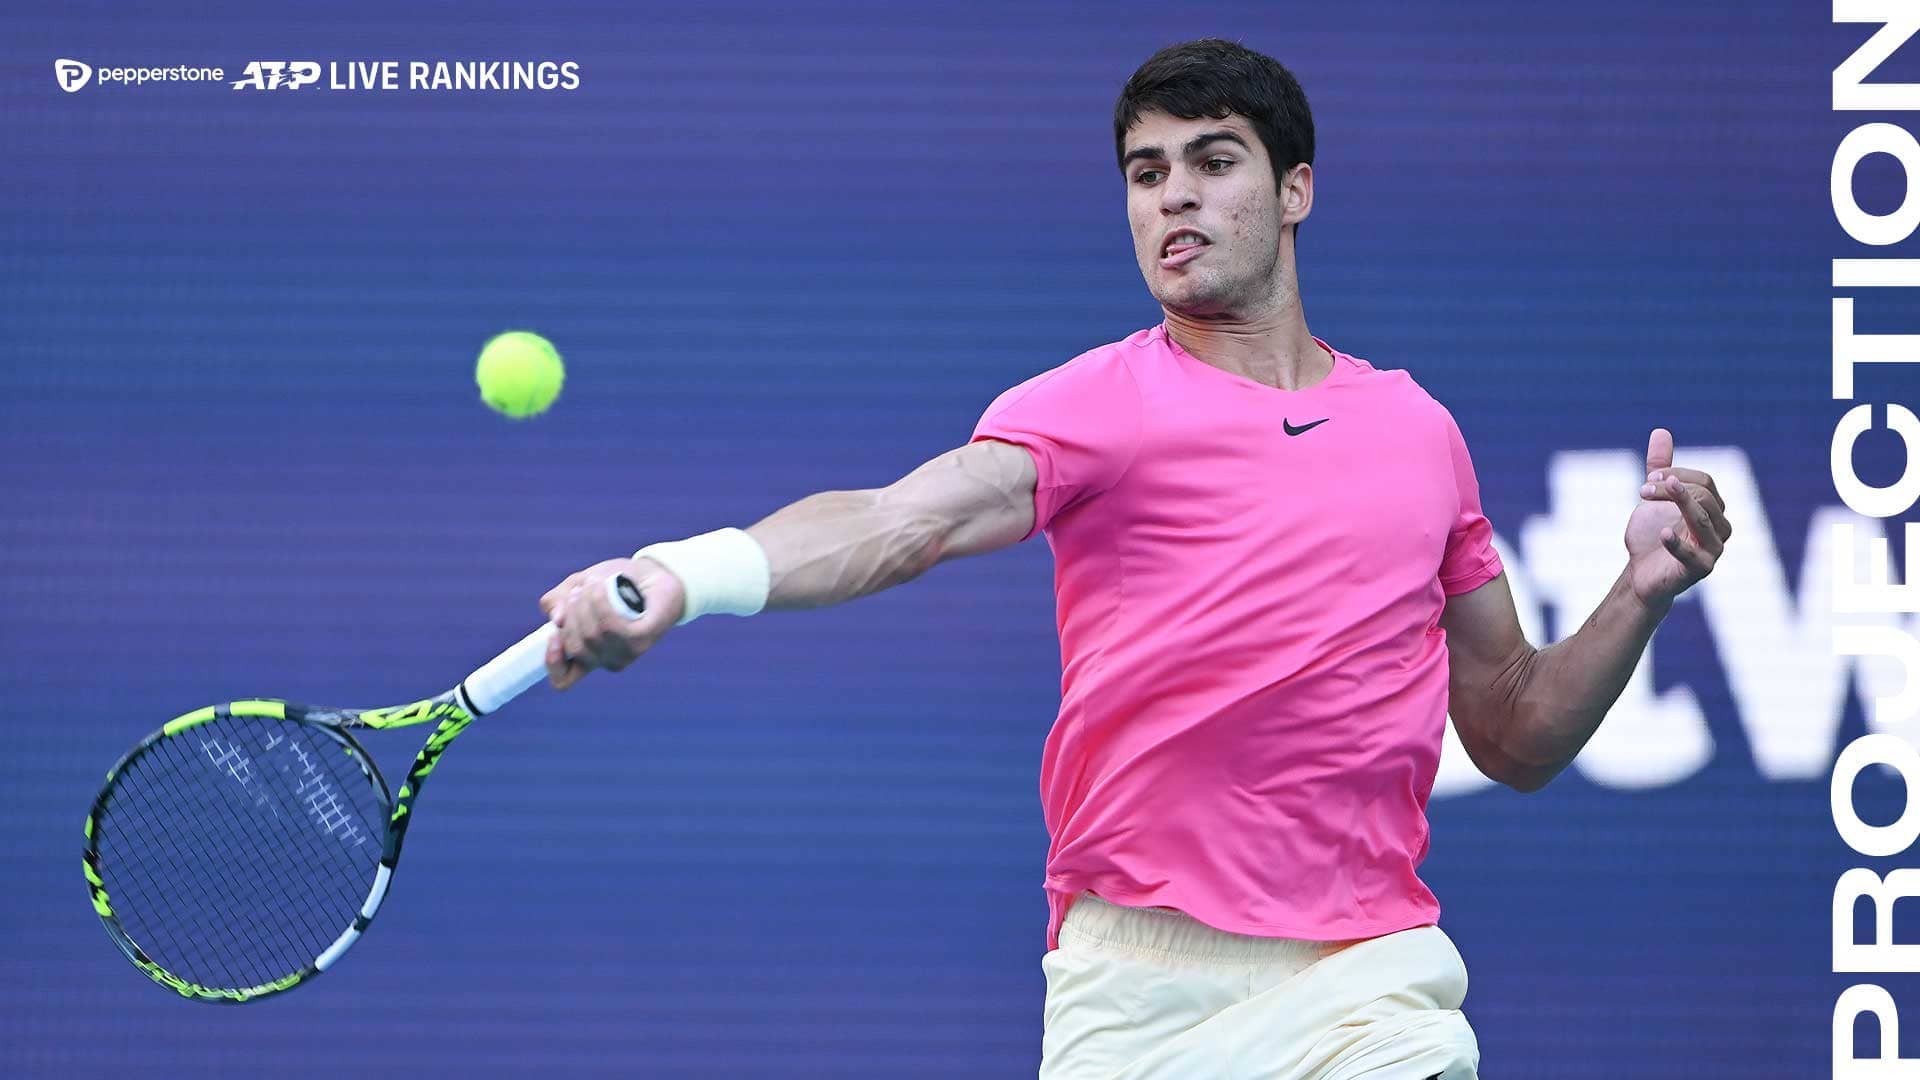 Current World No. 2 Carlos Alcaraz has held No. 1 in the Pepperstone ATP Rankings for 22 weeks in his career.